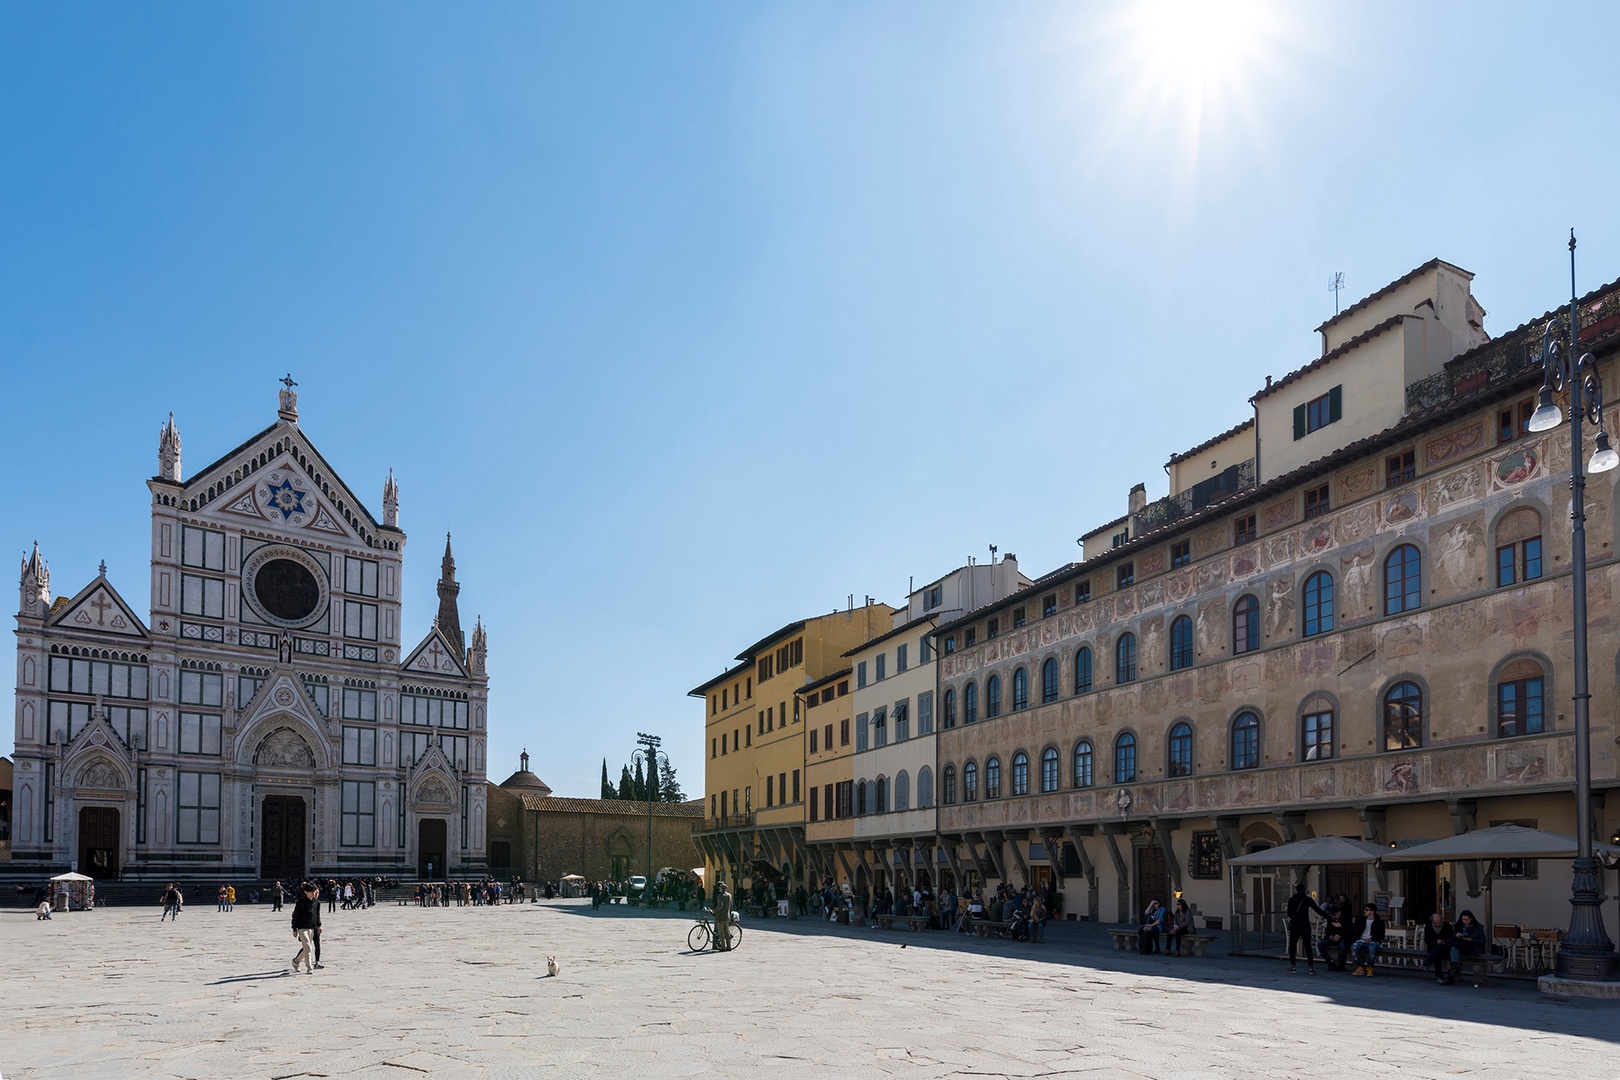 The apartment is located in a beautiful palazzo on the famous Piazza Santa Croce.